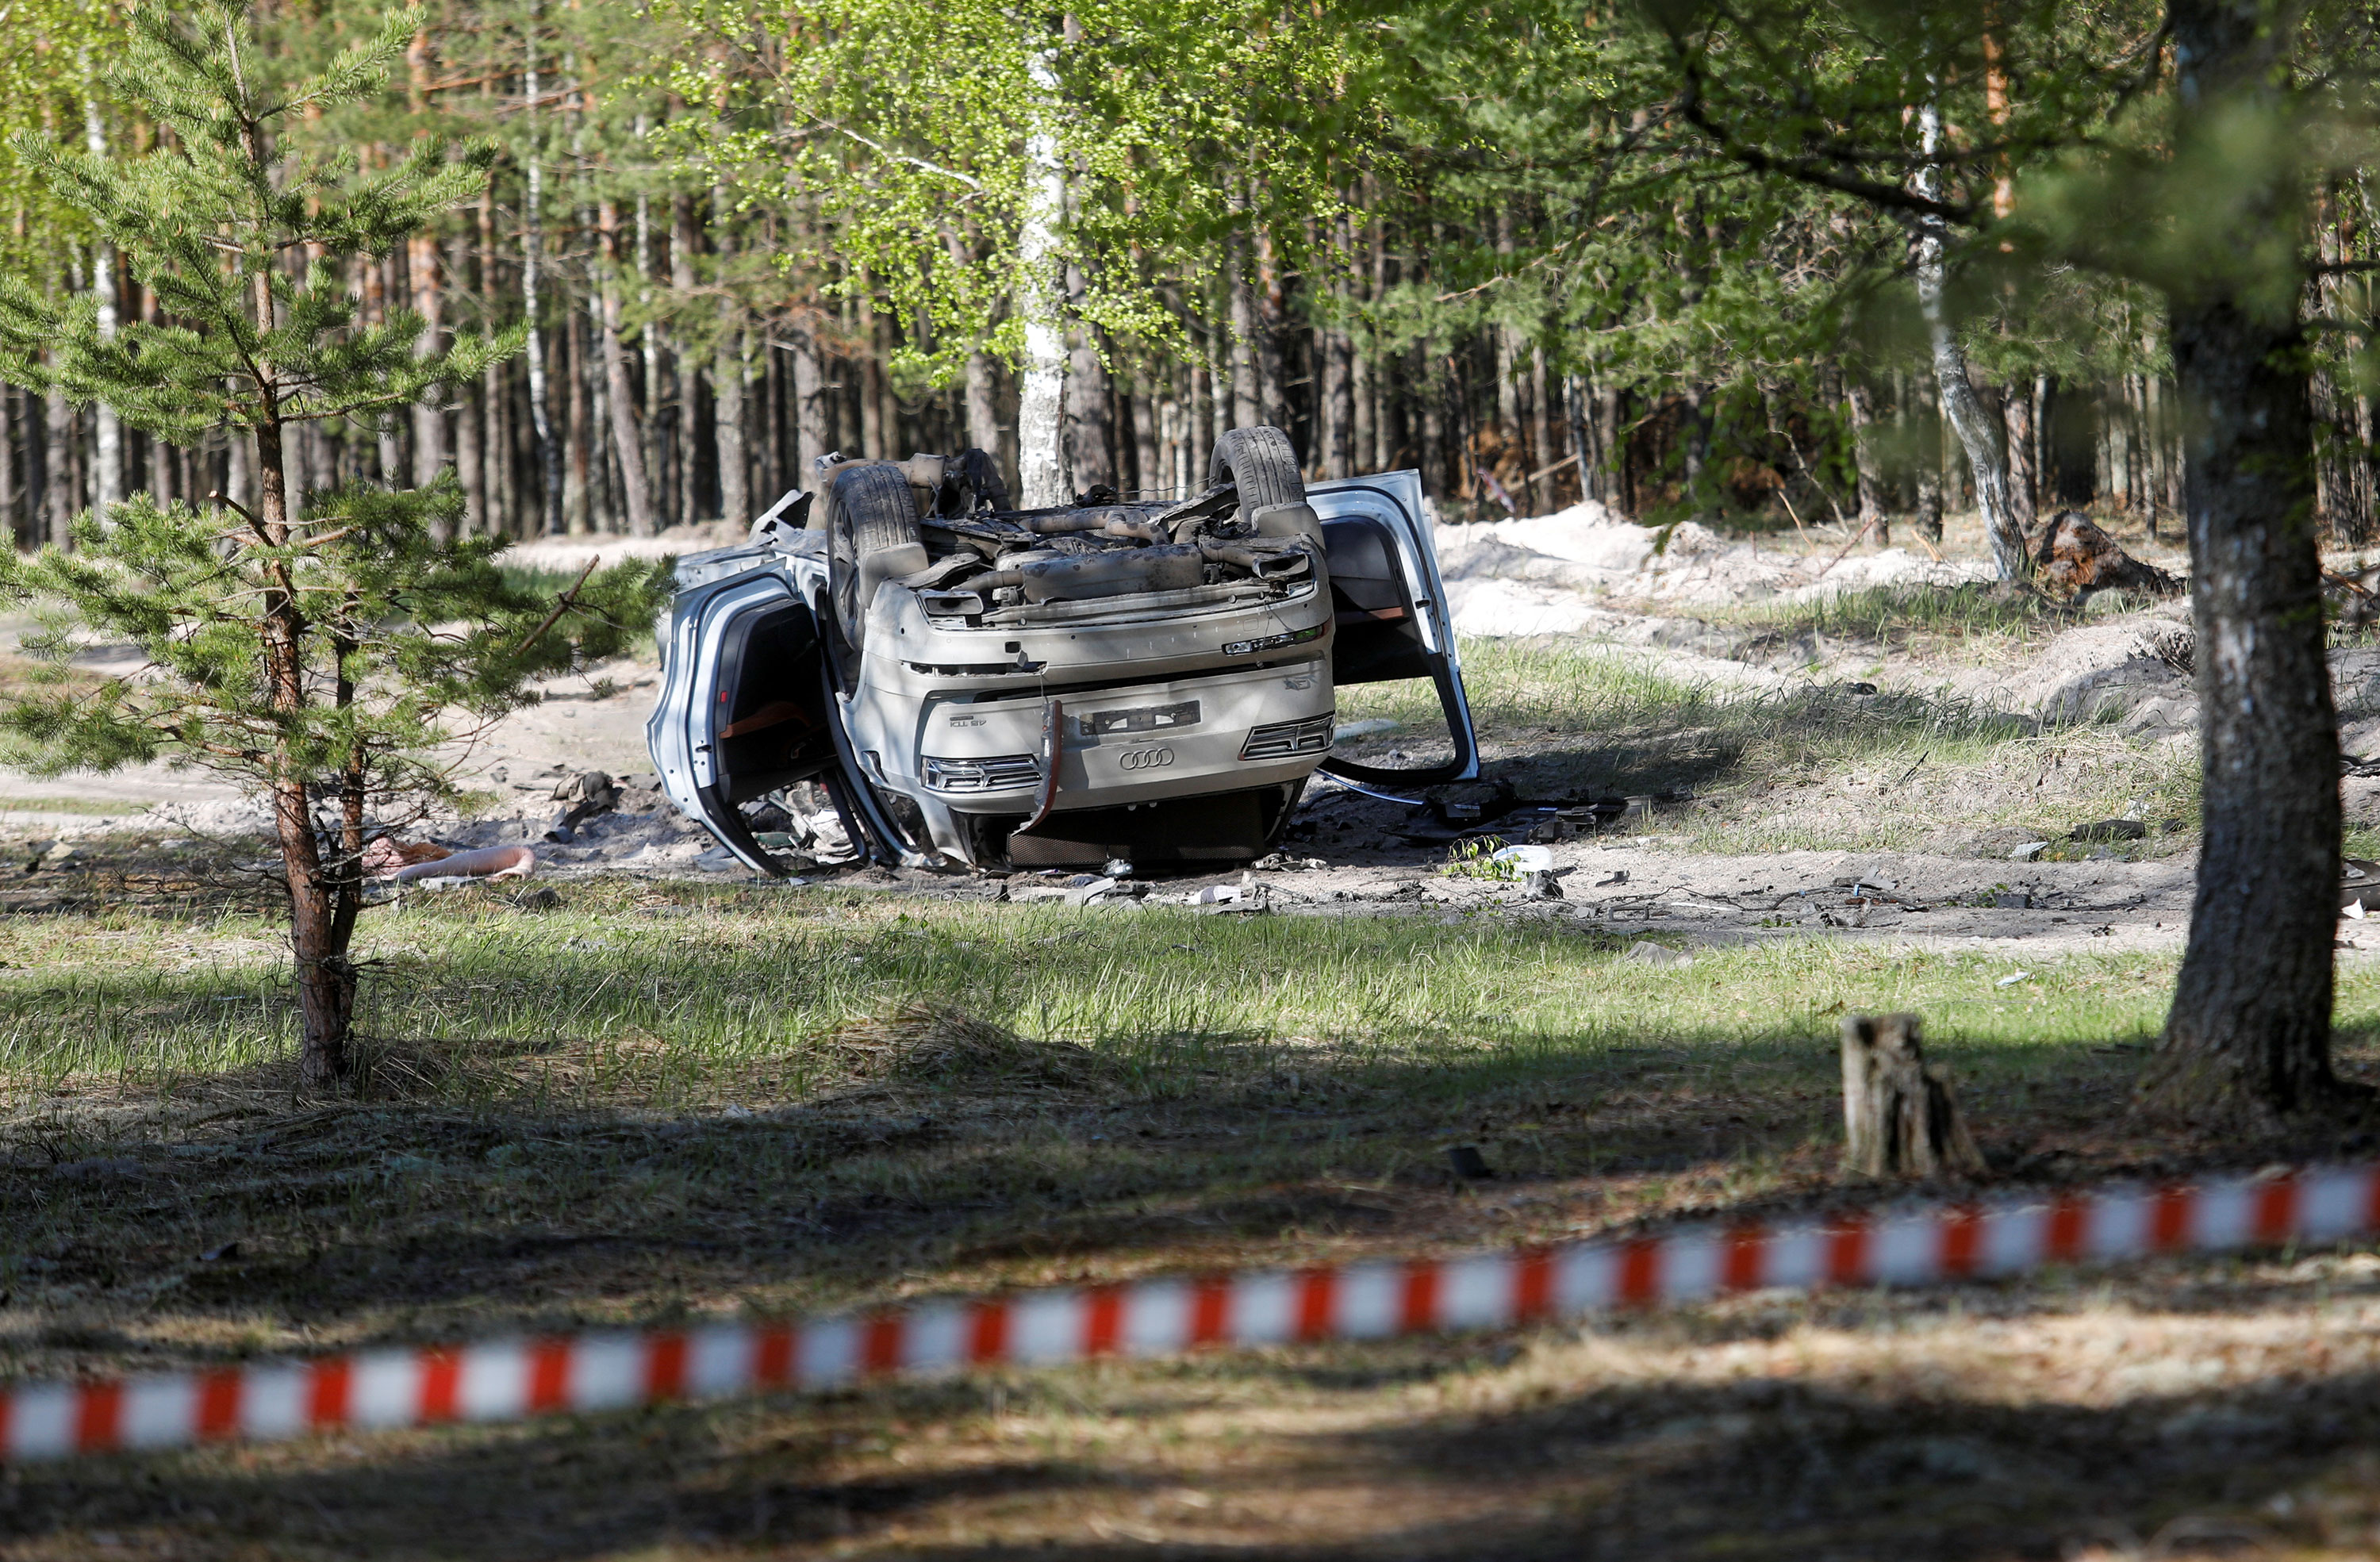 A damaged white Audi Q7 car is overturned after Russian military blogger Zakhar Prilepin was allegedly wounded in a bomb attack in Nizhny Novgorod, Russia, on May 6.